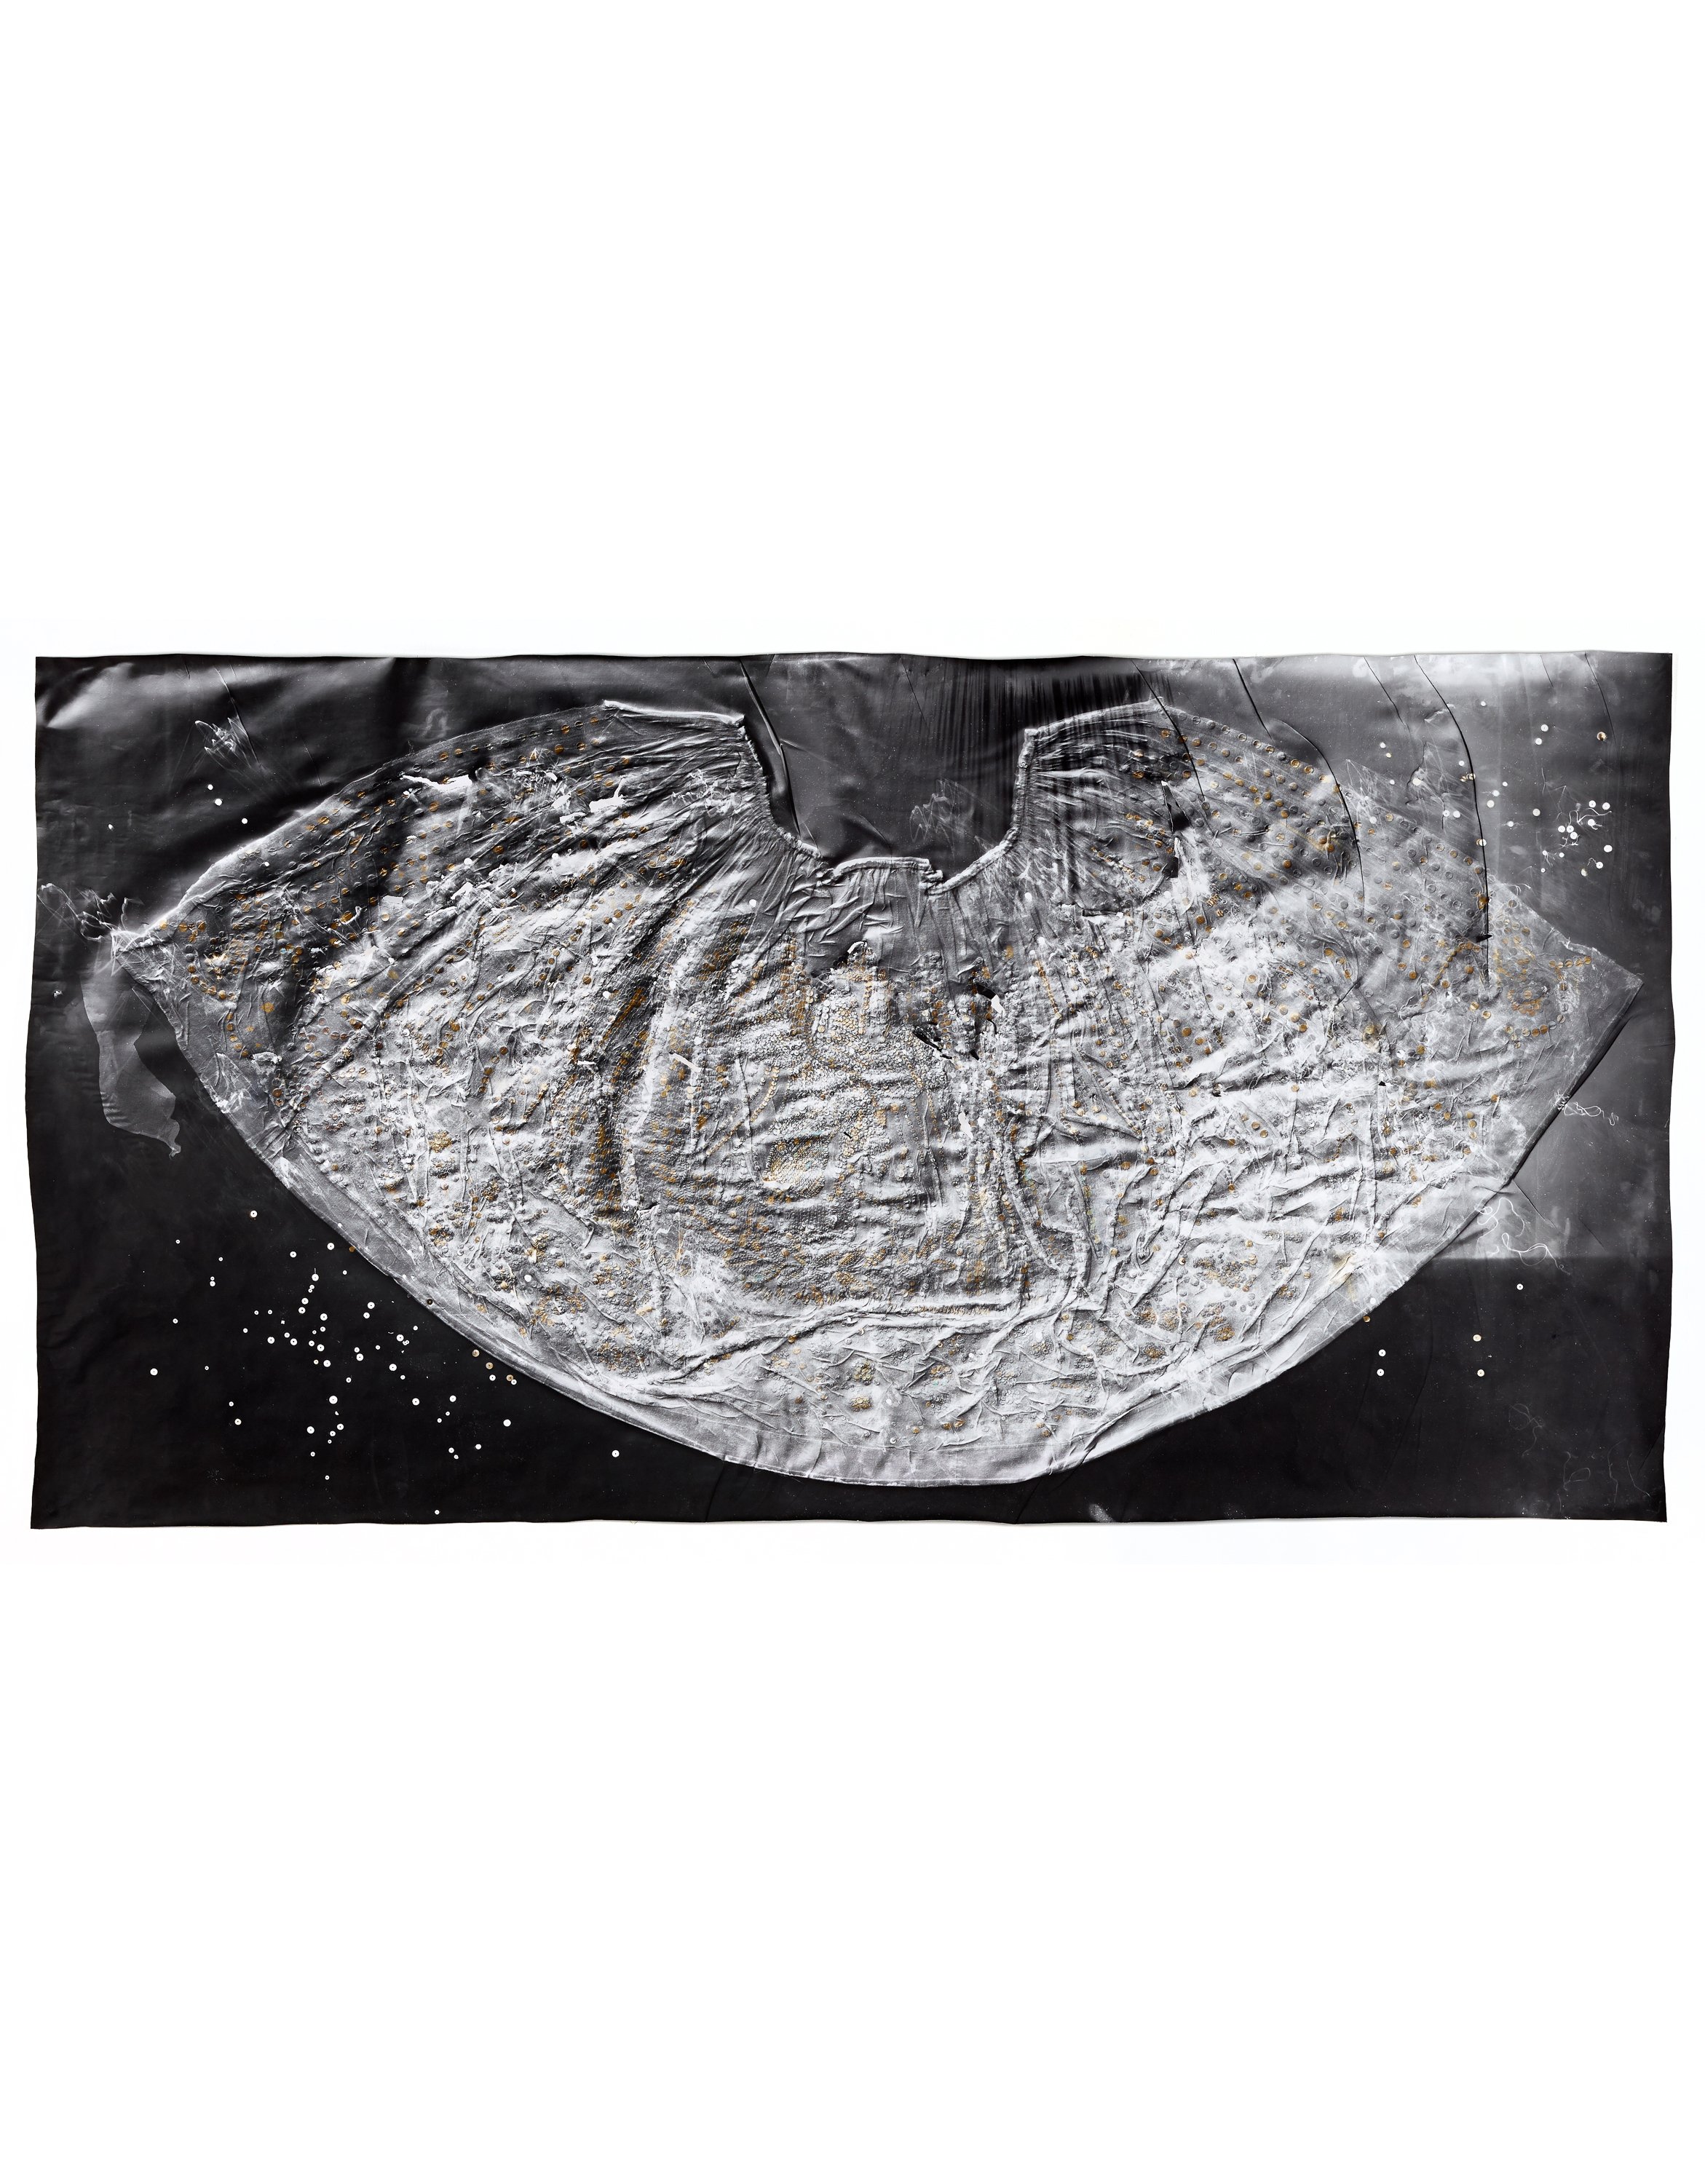   La China Poblana 1,  2018 Photographic relief (embossed silver gelatin photogram, sepia toned) Impression of handmade skirt, heavily sequined with eagle and snake emblem (Mexico, made in 1920s, altered in 1940s) 42 x 78 in 